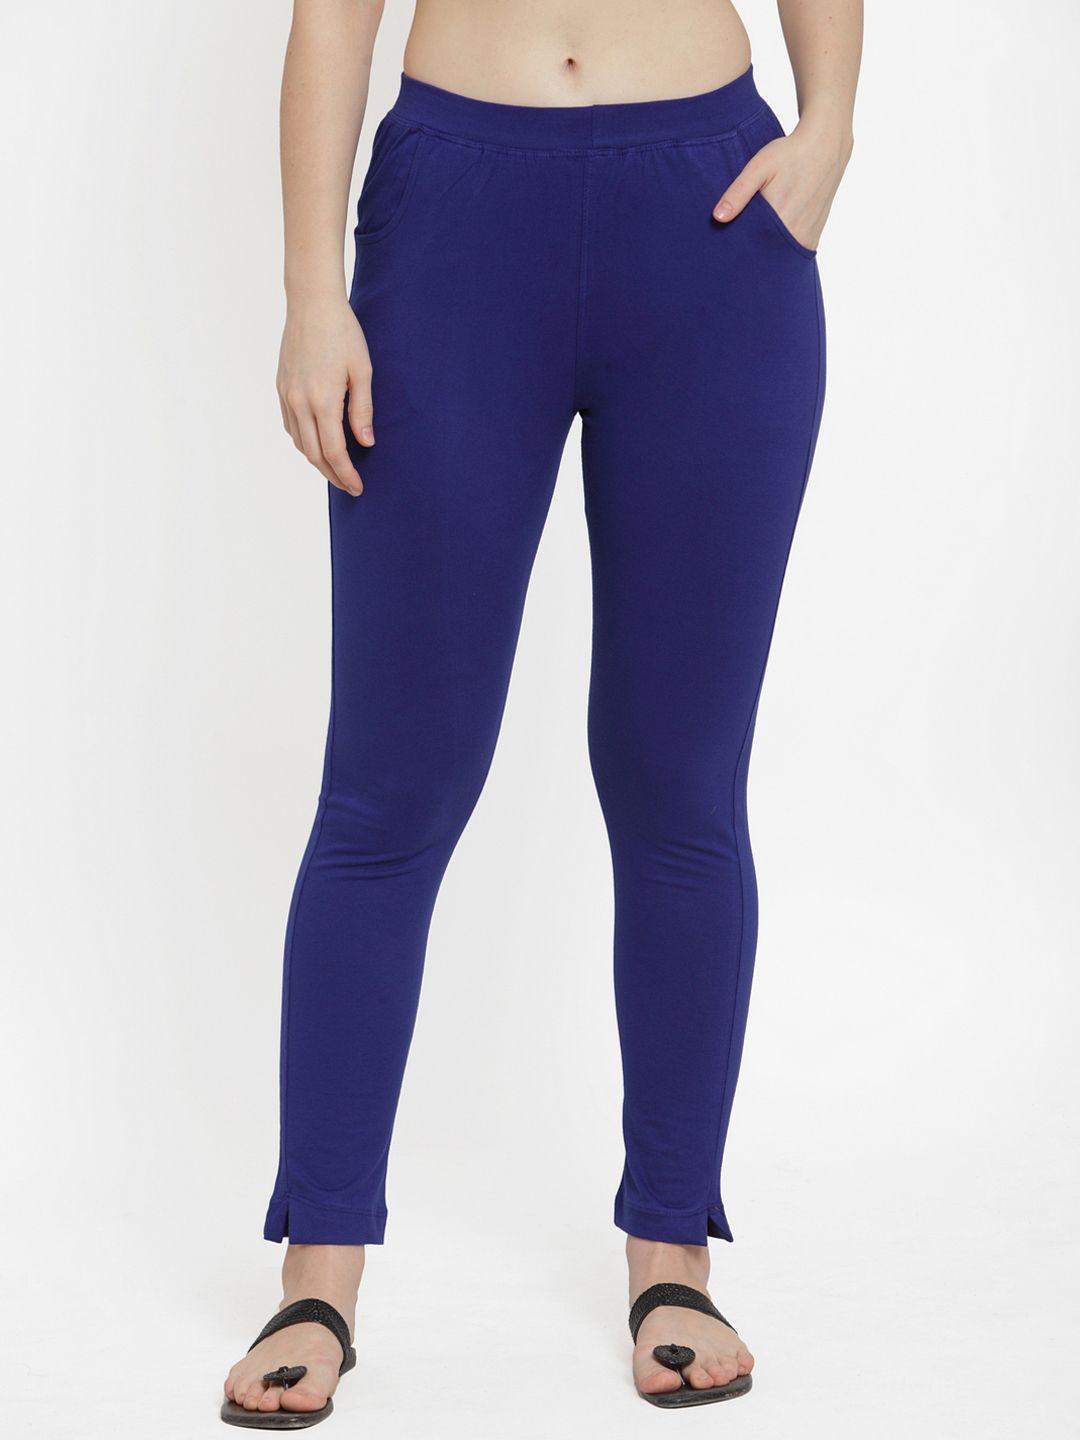 tag 7 women blue solid ankle-length leggings